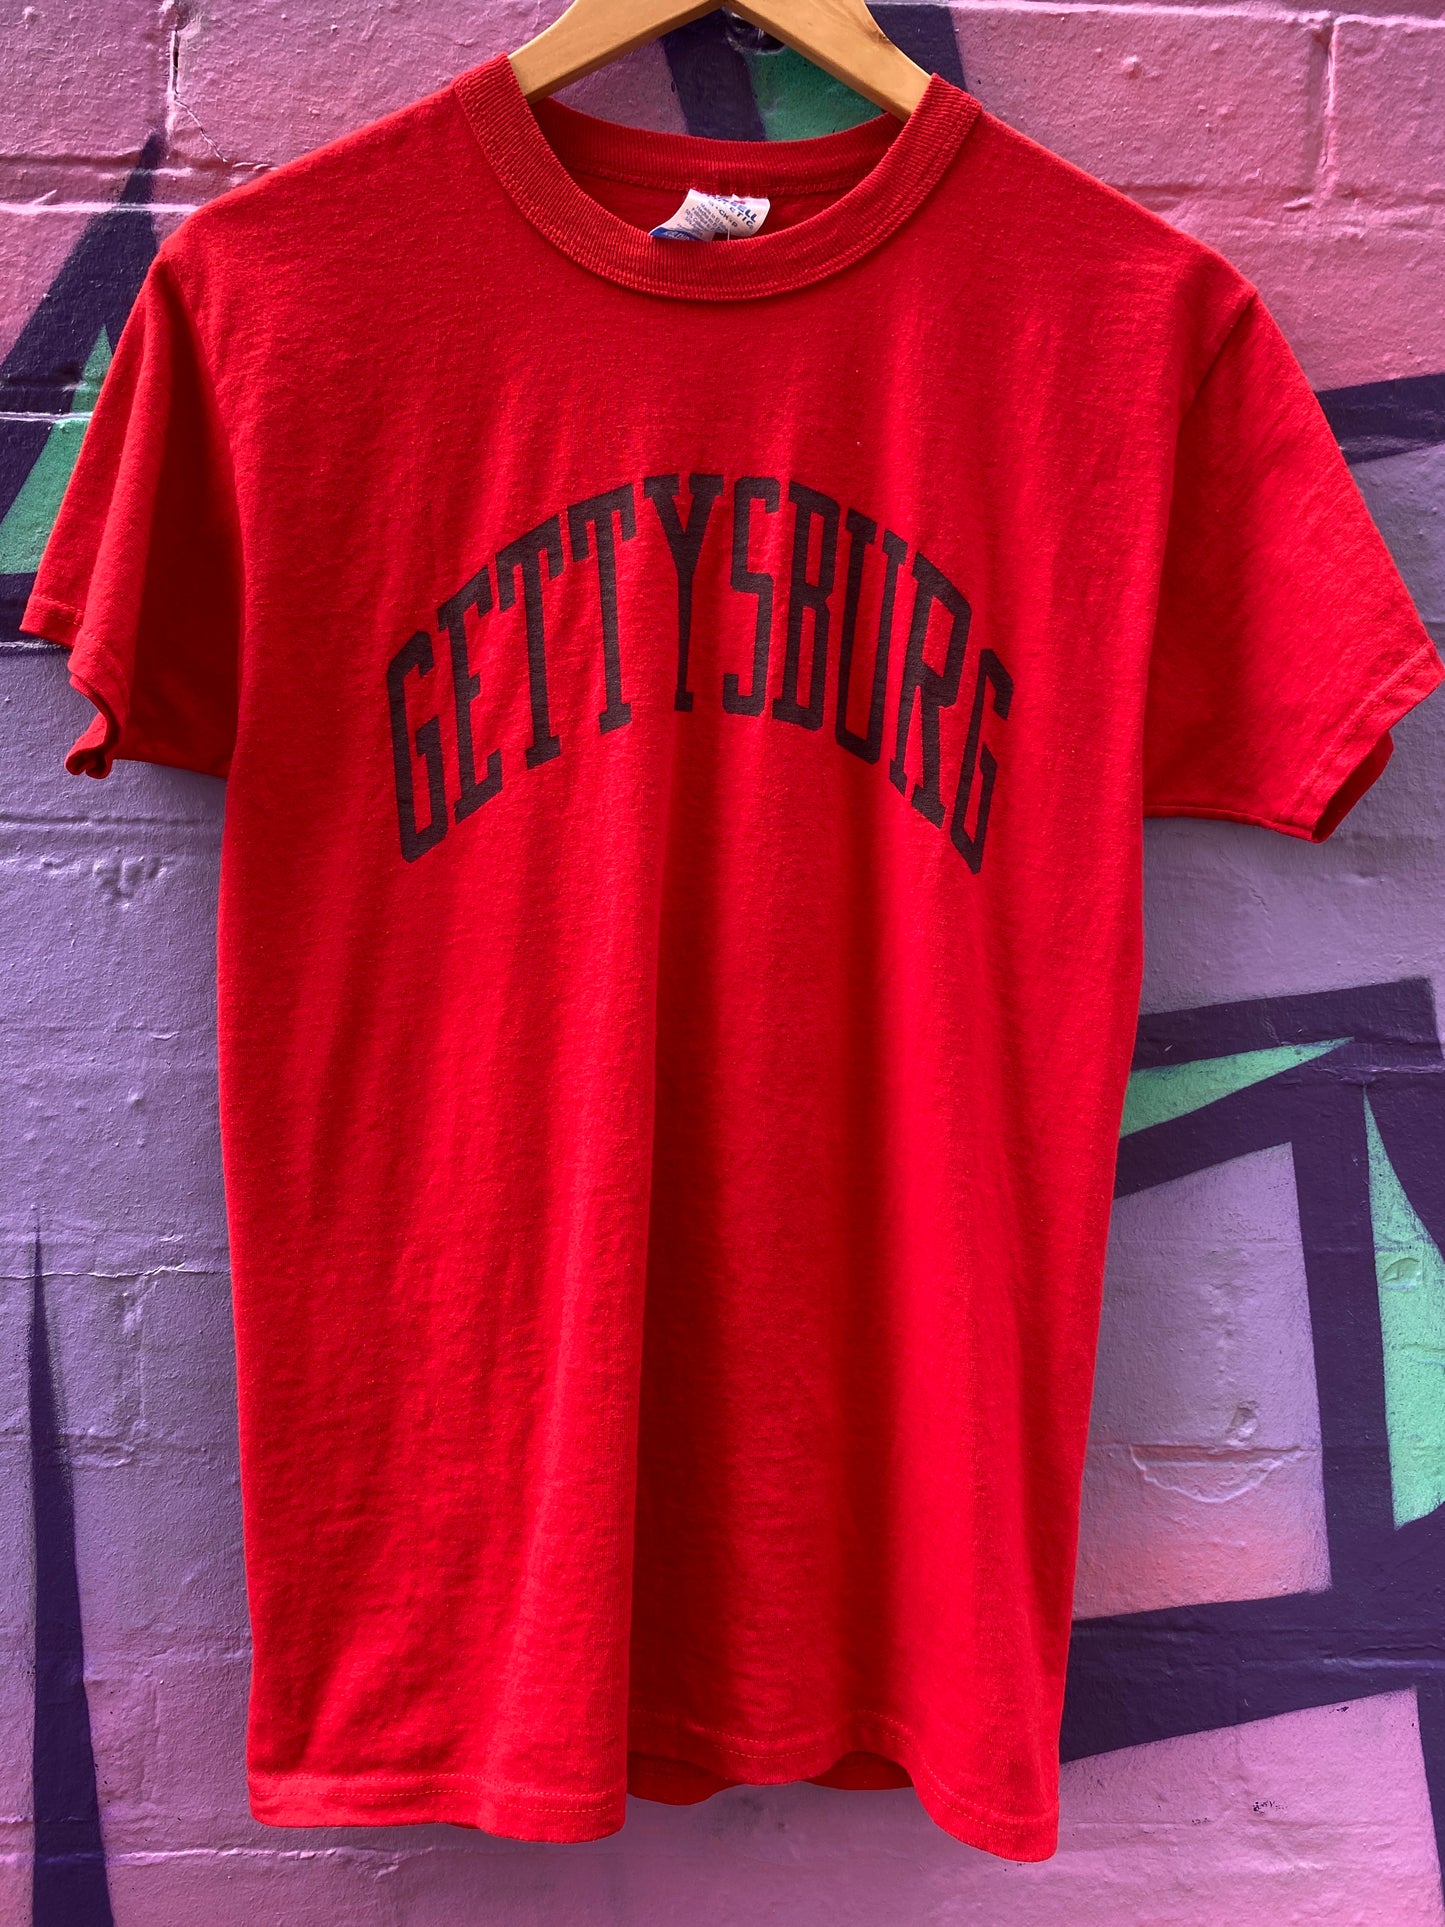 S - Red Gettysburg Spellout Russell Athletic Tee